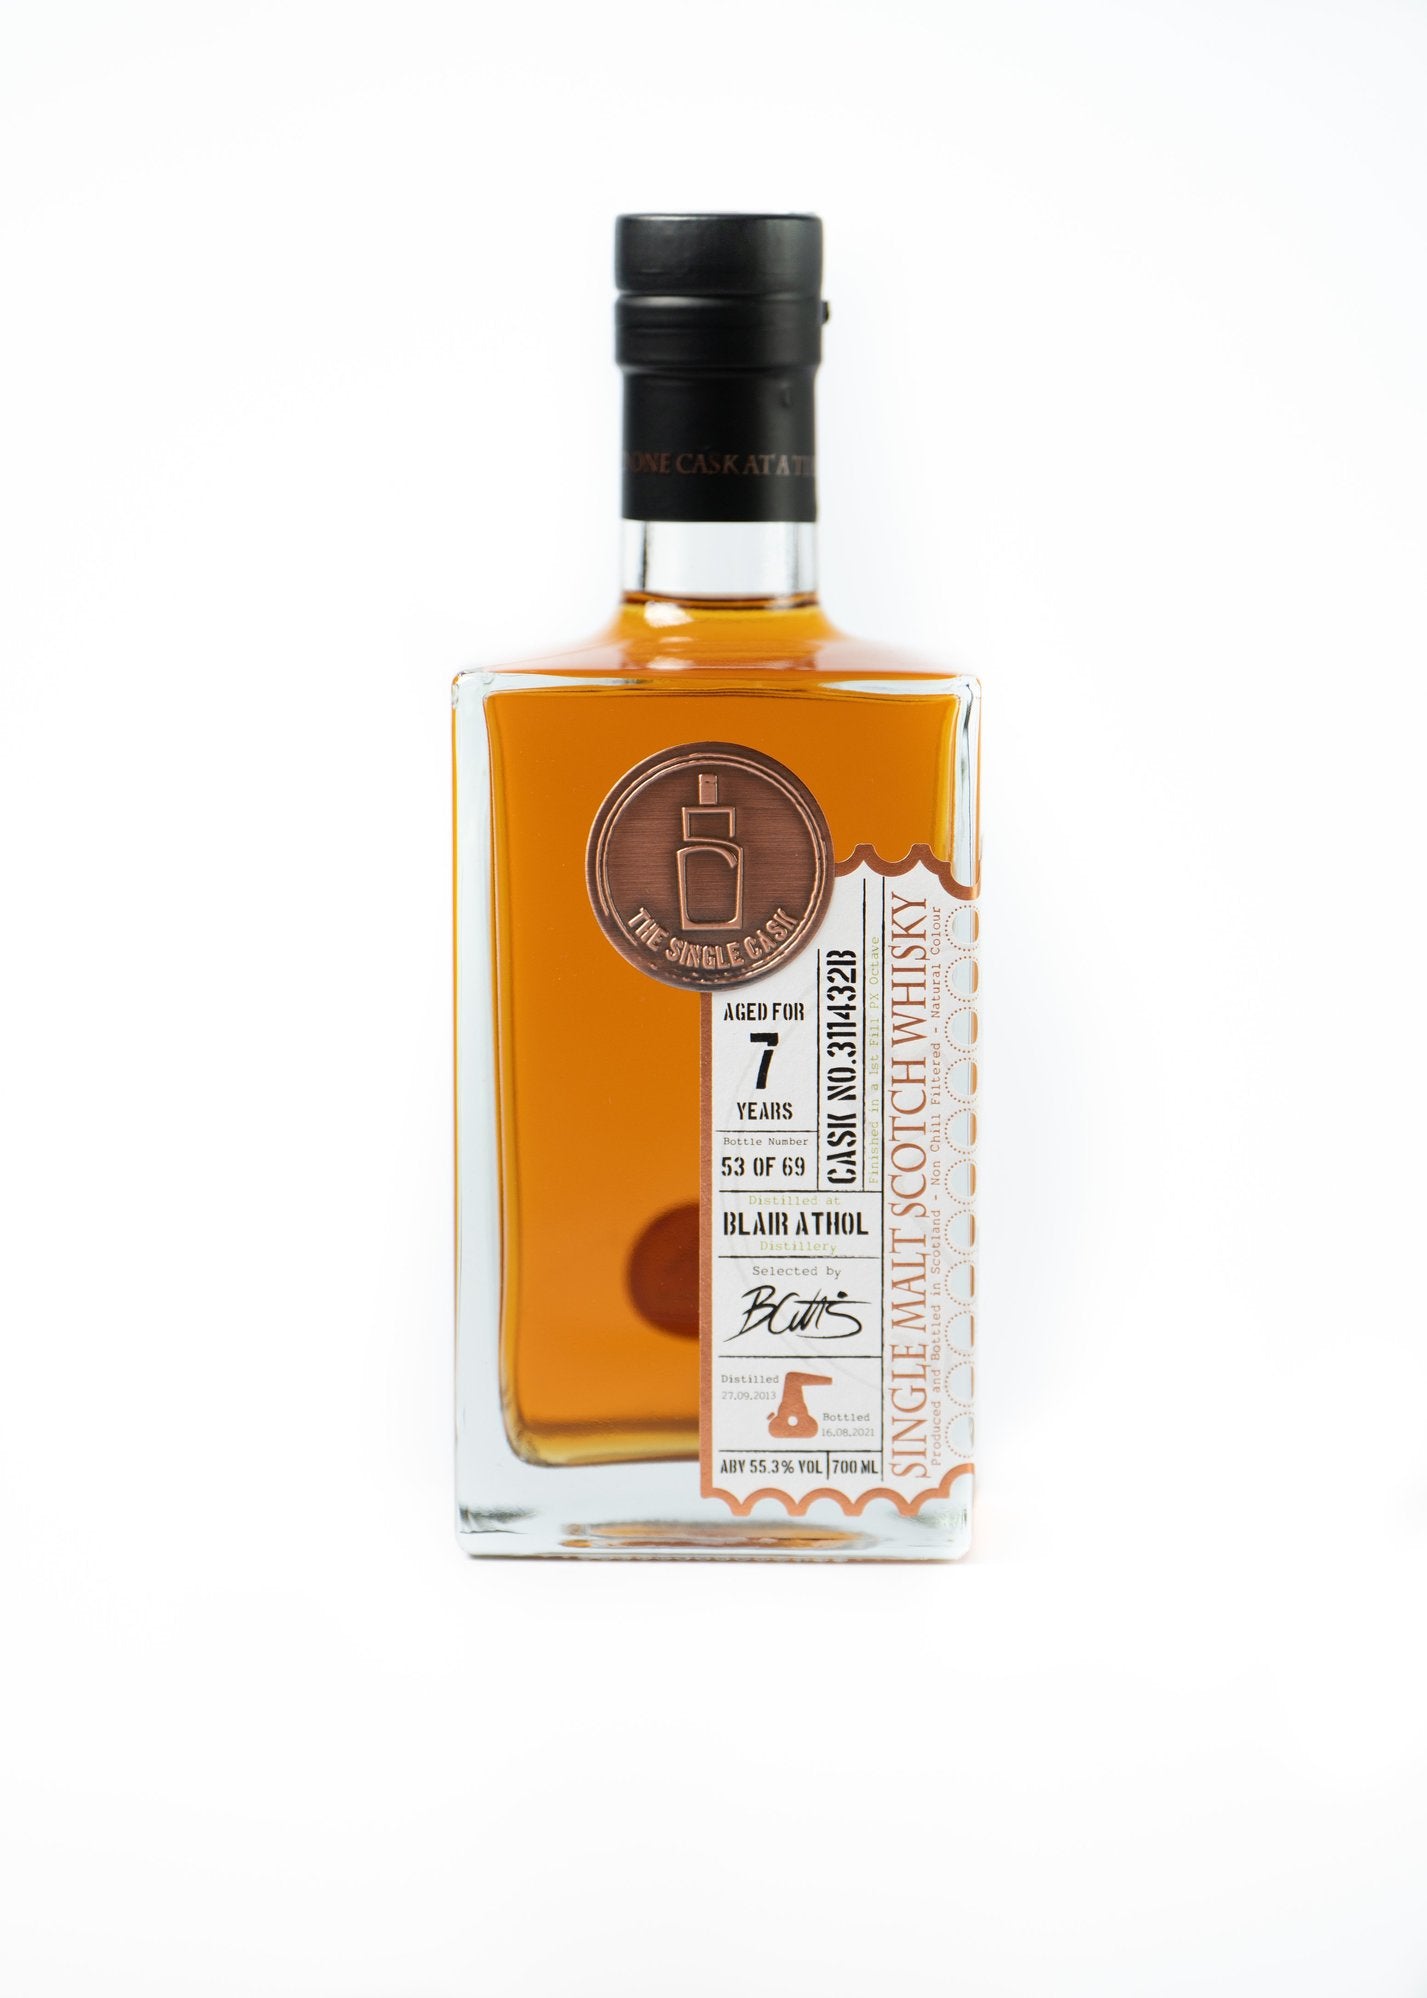 Blair Athol 7 years old scotch whisky by The Single Cask